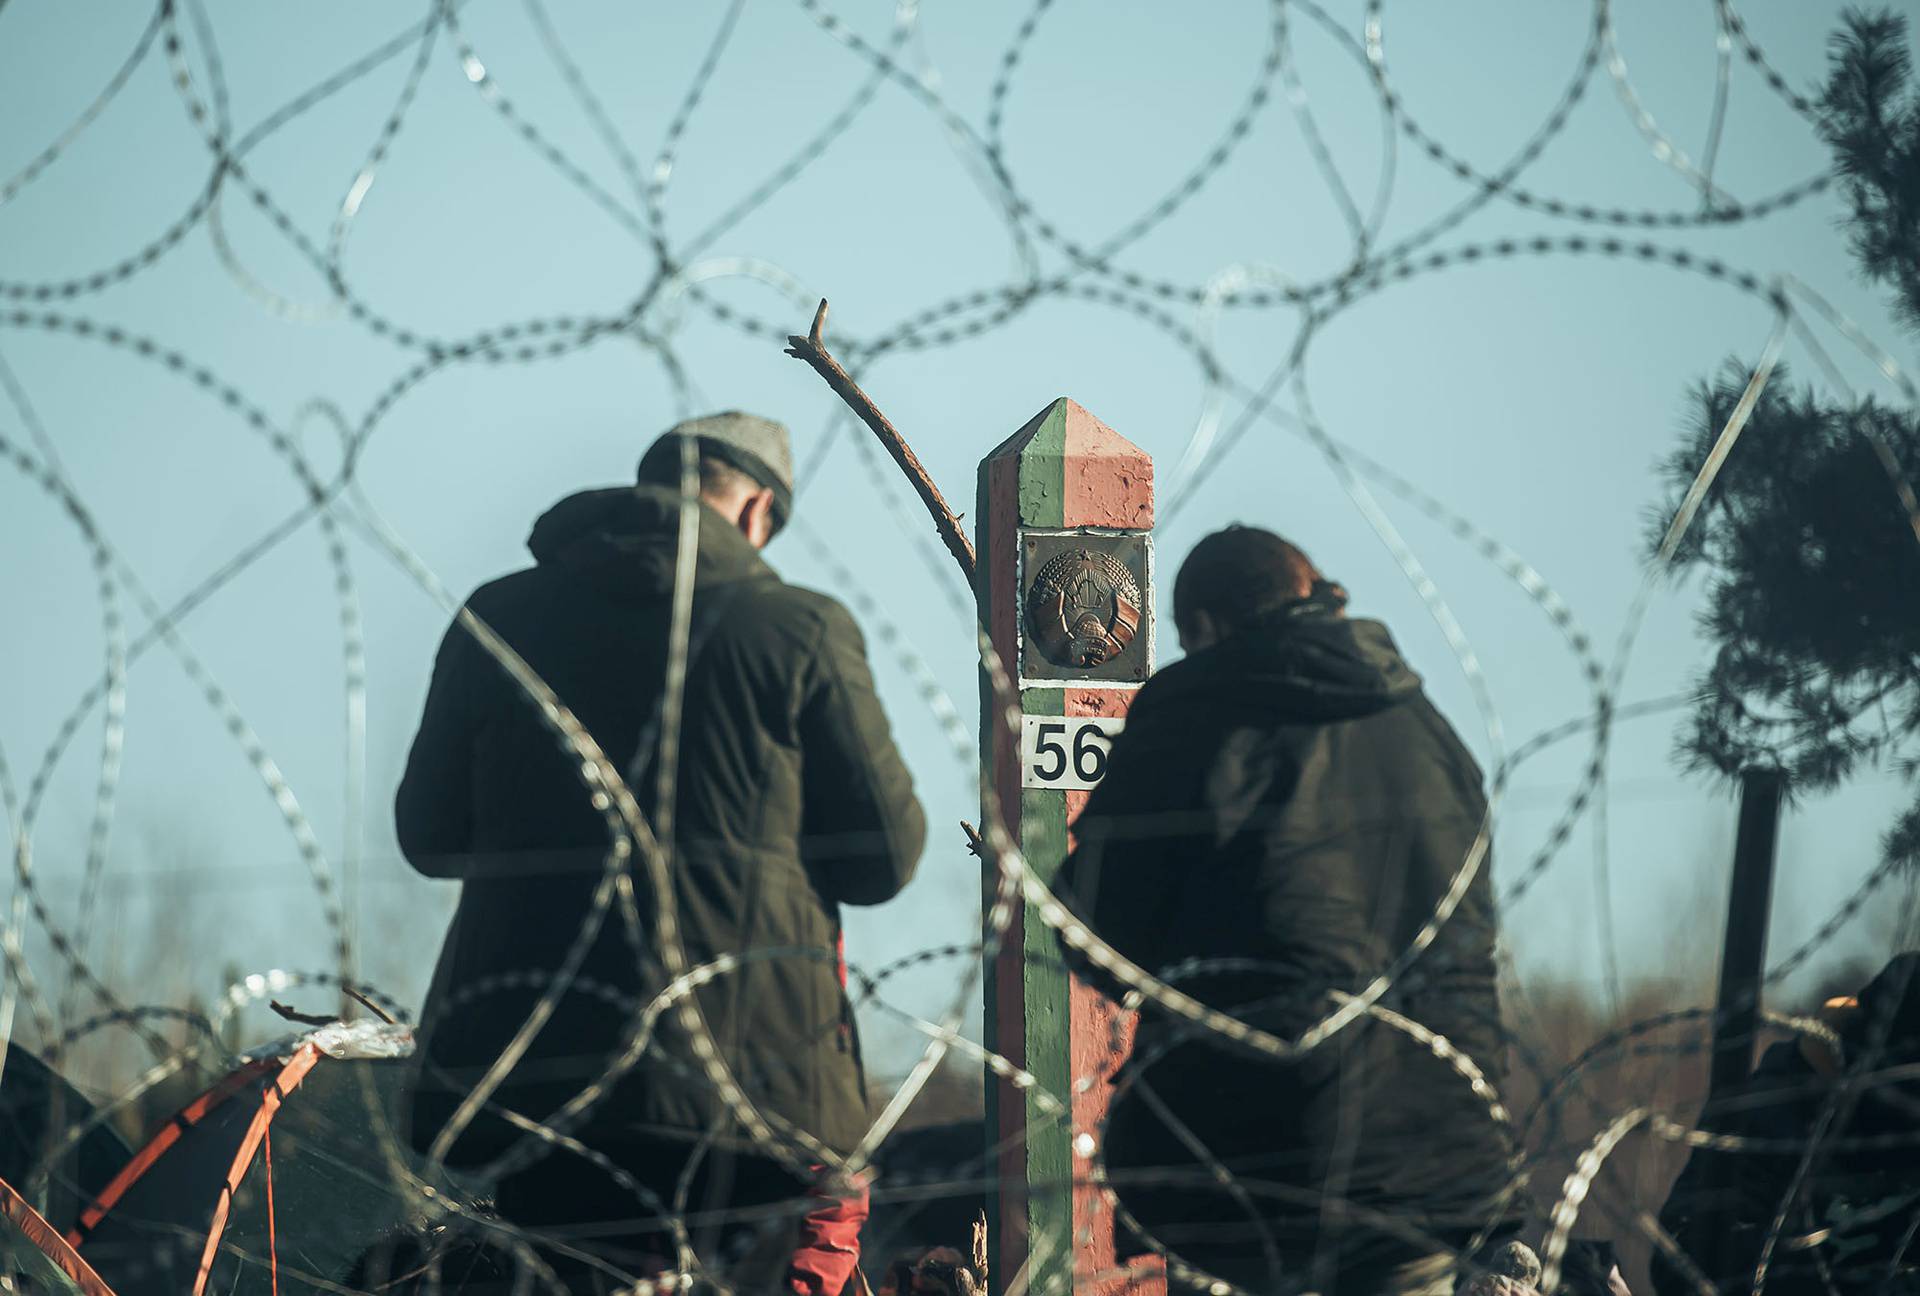 Migrants are seen on the Belarus side of the border with Poland near Kuznica